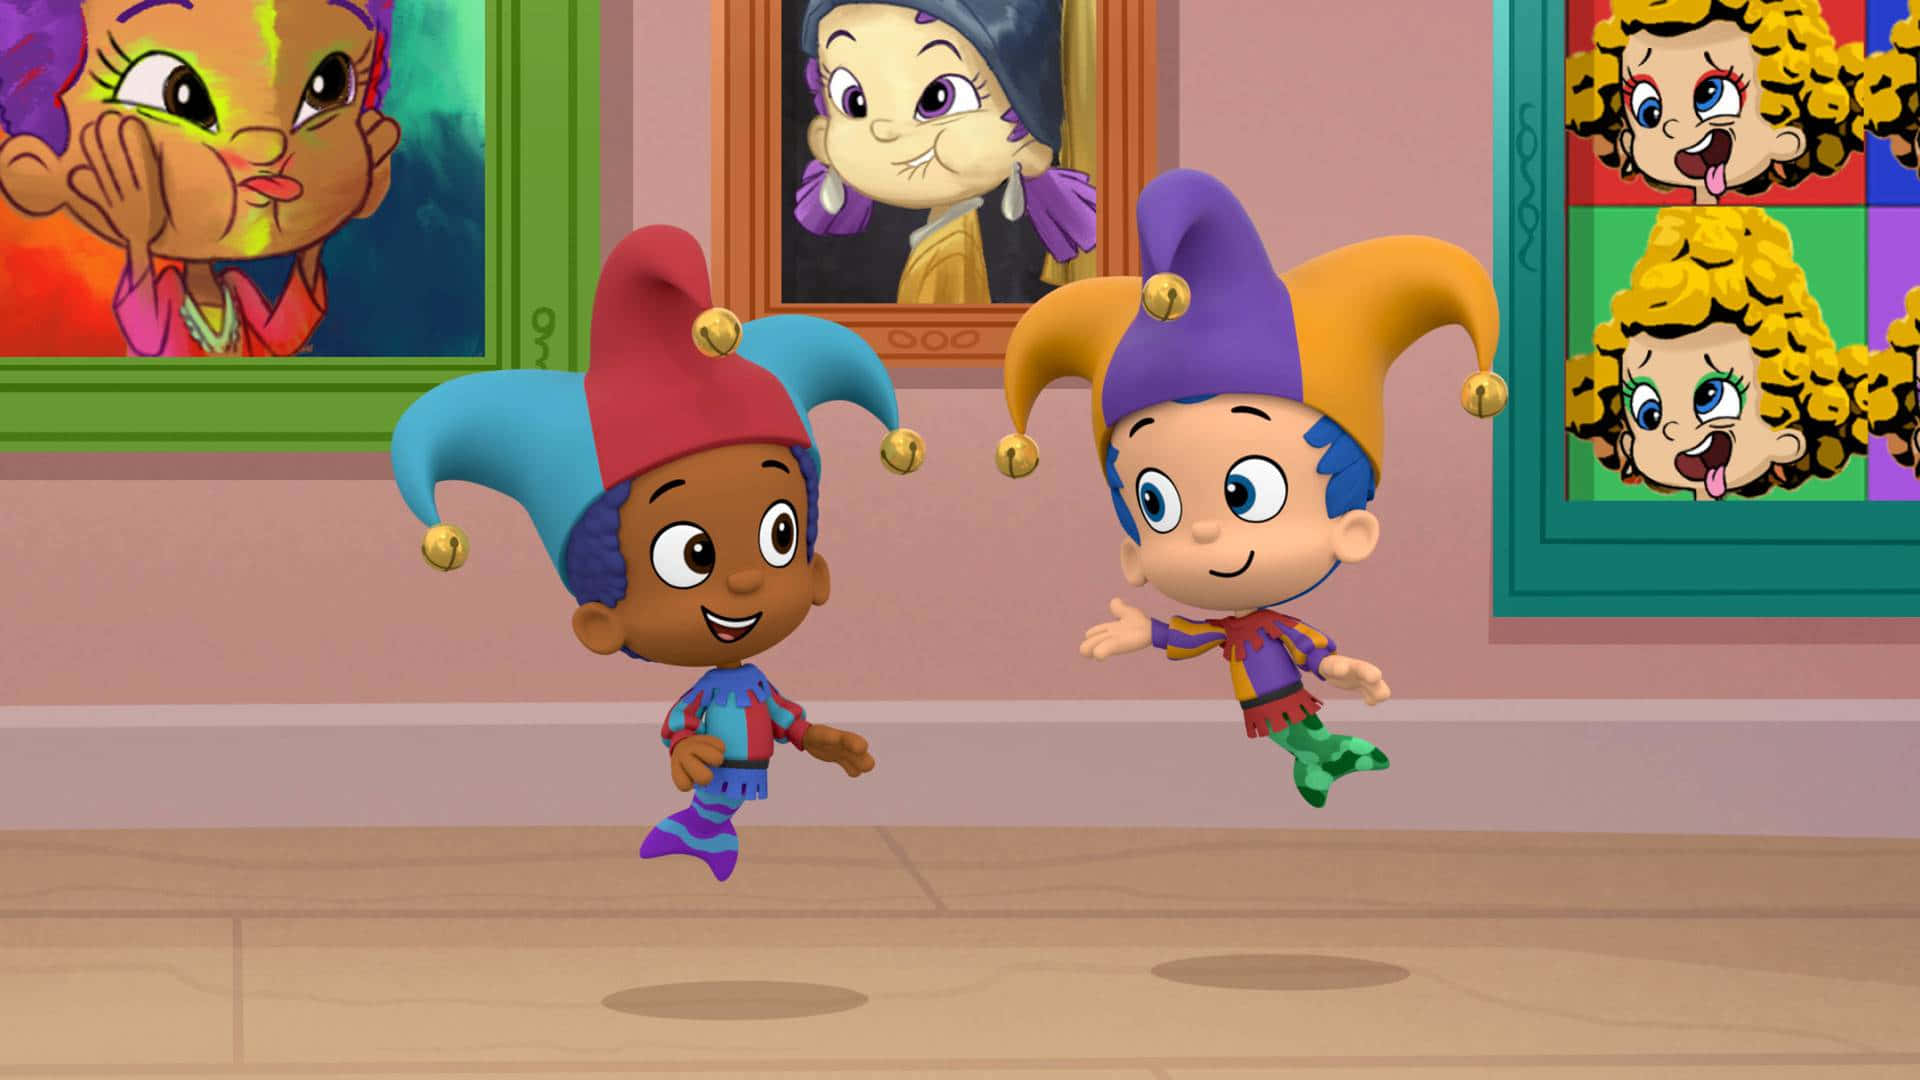 "Bubble Guppies dive into a world of fun in this image!"